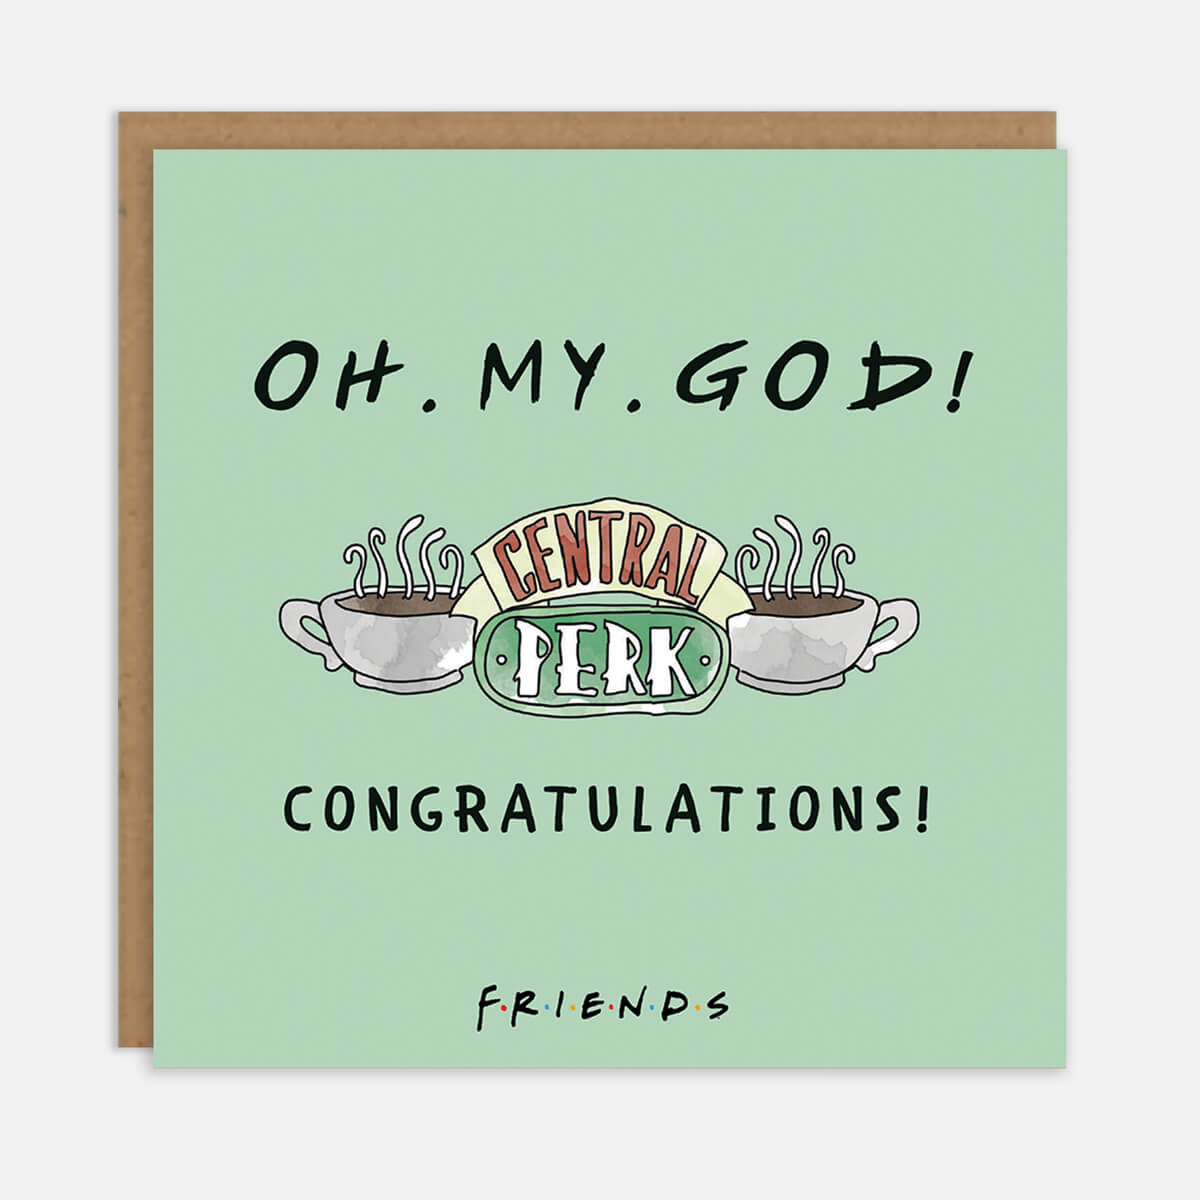 Friends TV Show Congratulations Card - Janice - "Oh My God Congratulations" - Green pastel card with black foiled and embossed text. Includes watercolour image of Central Perk logo